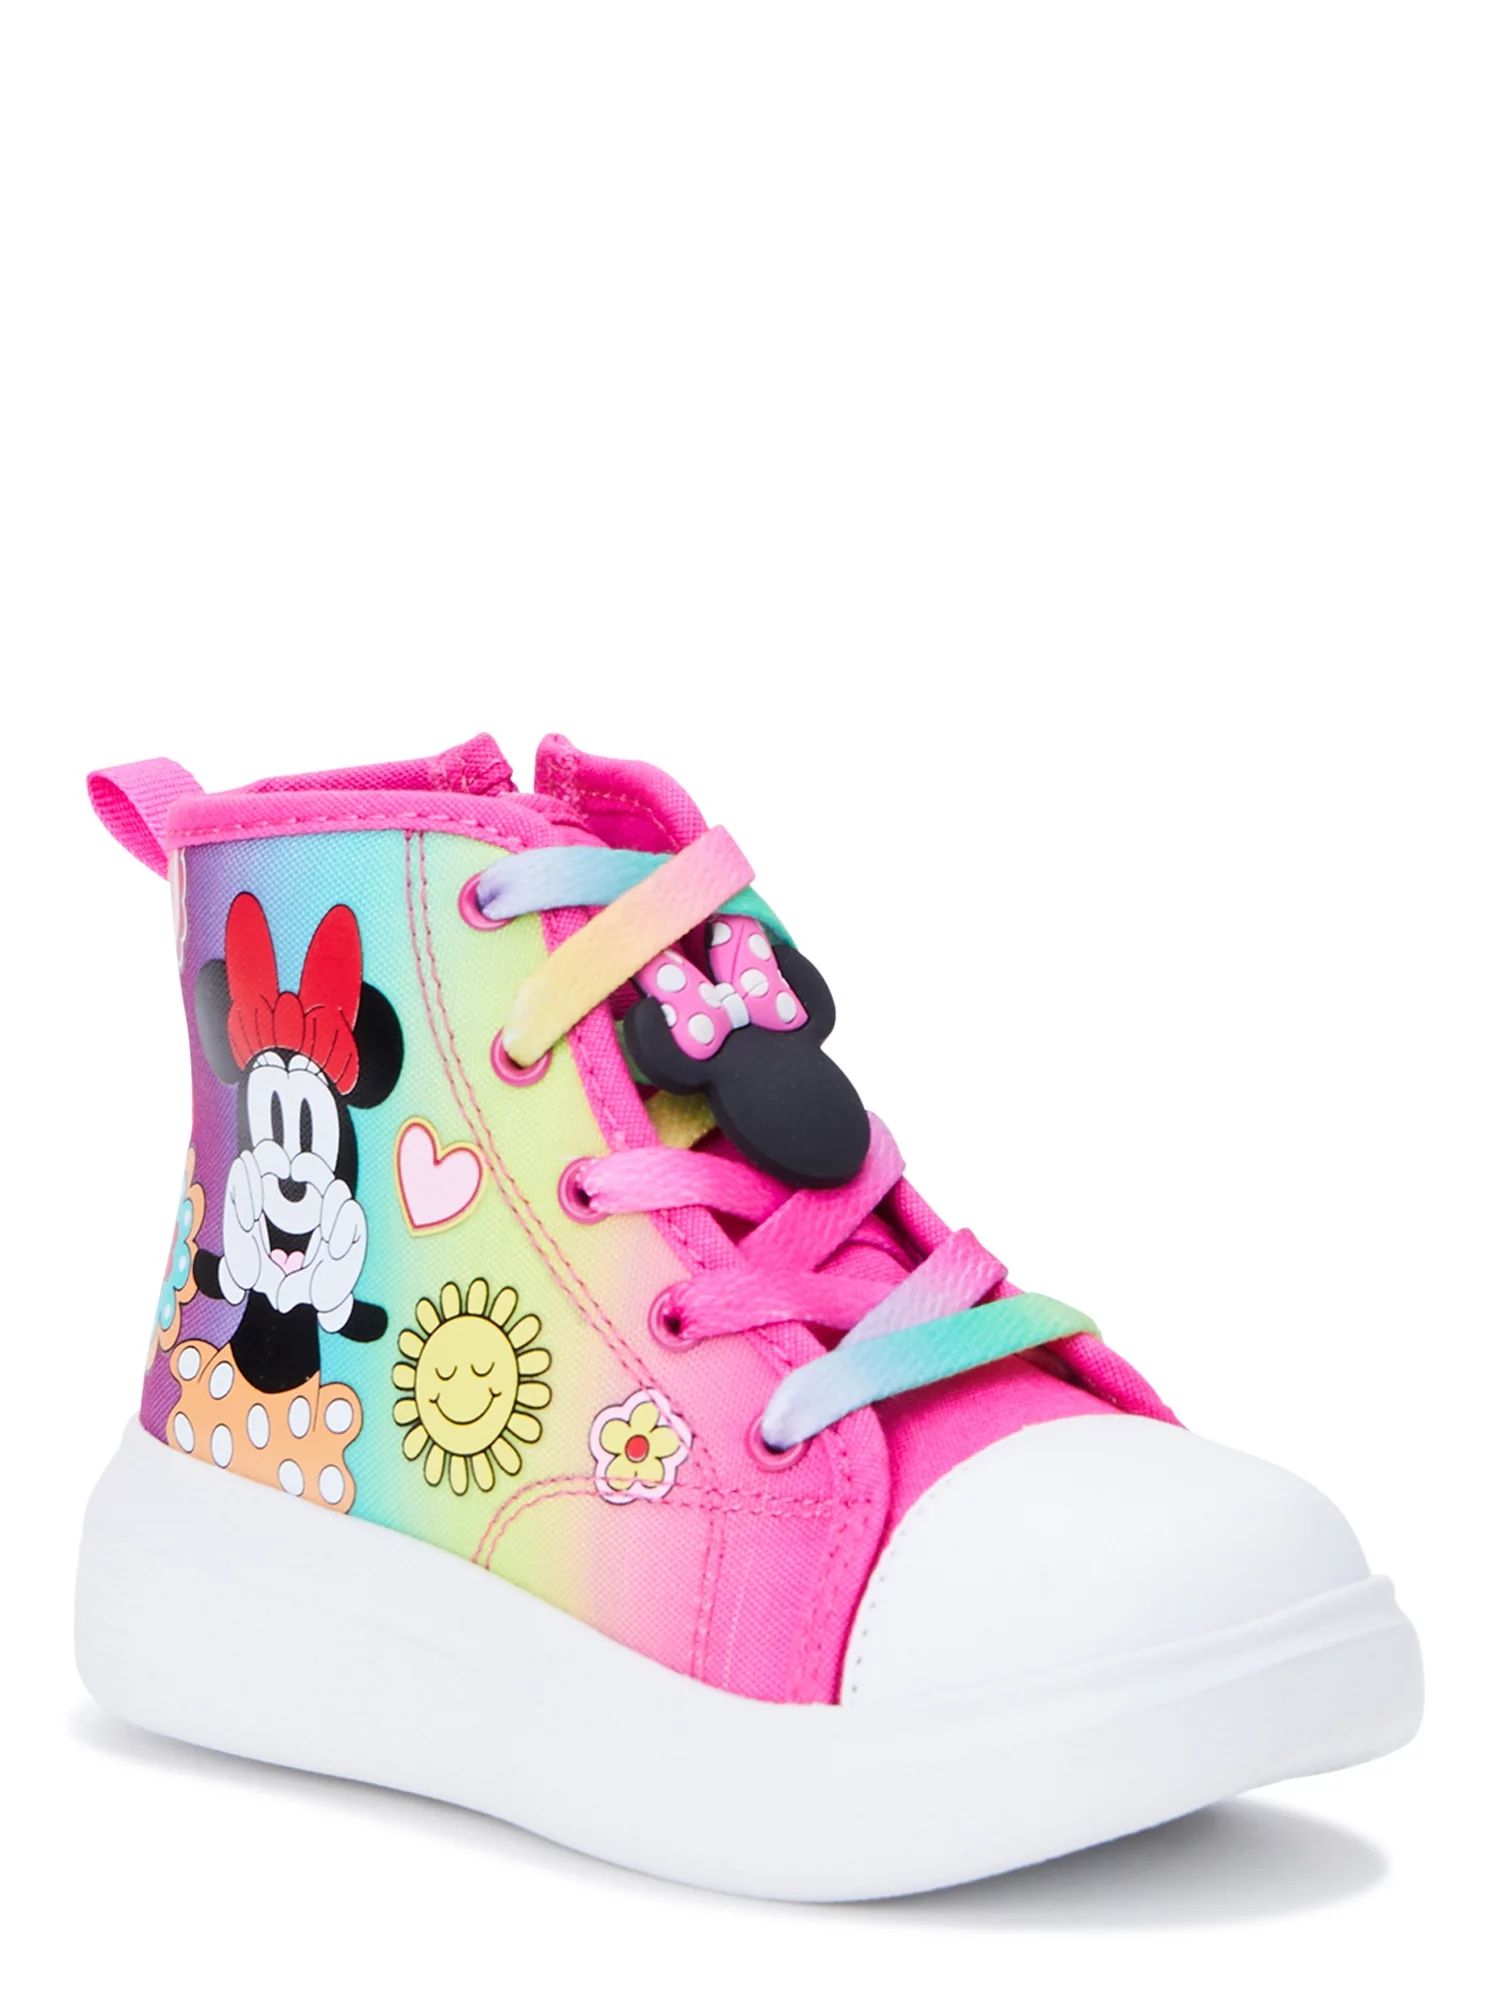 Disney Minnie Mouse Toddler Girls High Top Sneakers, Sizes 7-12 | Walmart (US)